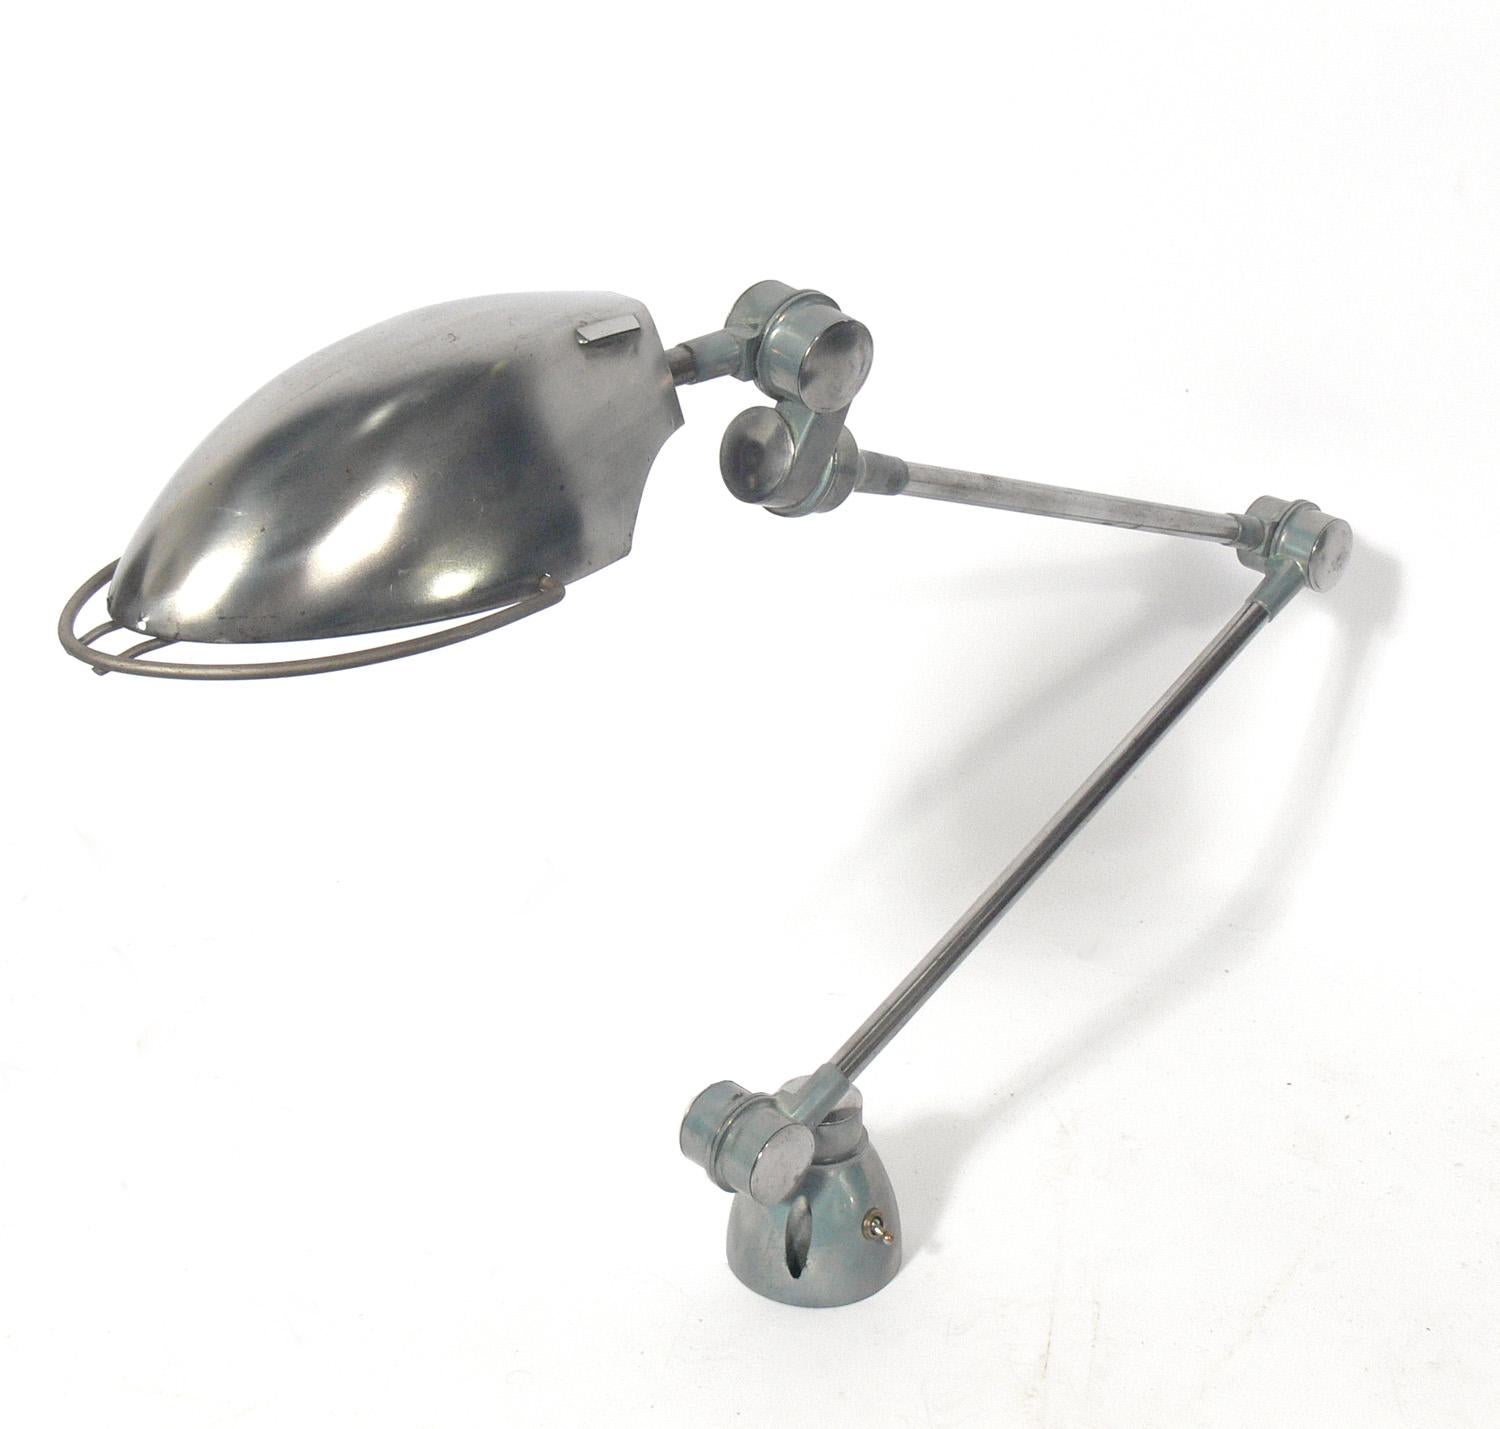 Streamlined metal desk lamp, European, circa 1950s. It has an articulated arm and shade and can be positioned to just the right angle. It has been stripped and has an industrial feel to it. It needs to be mounted with screws onto a desk or table. It